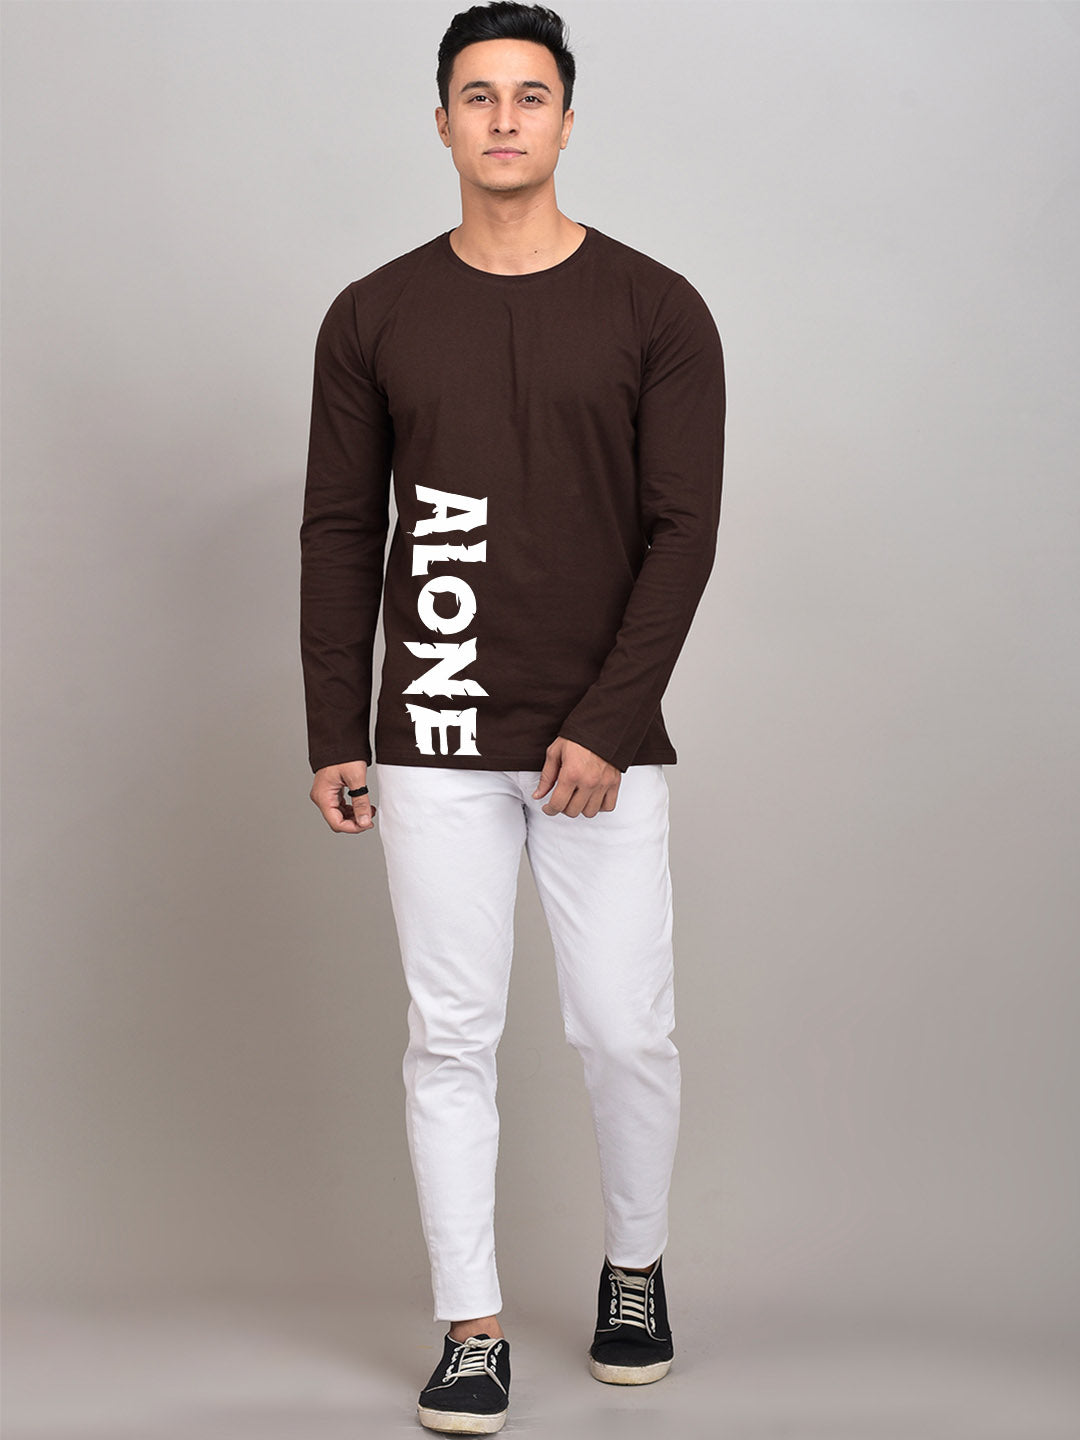 ALONE BROWN FULL SLEEVES T-SHIRT